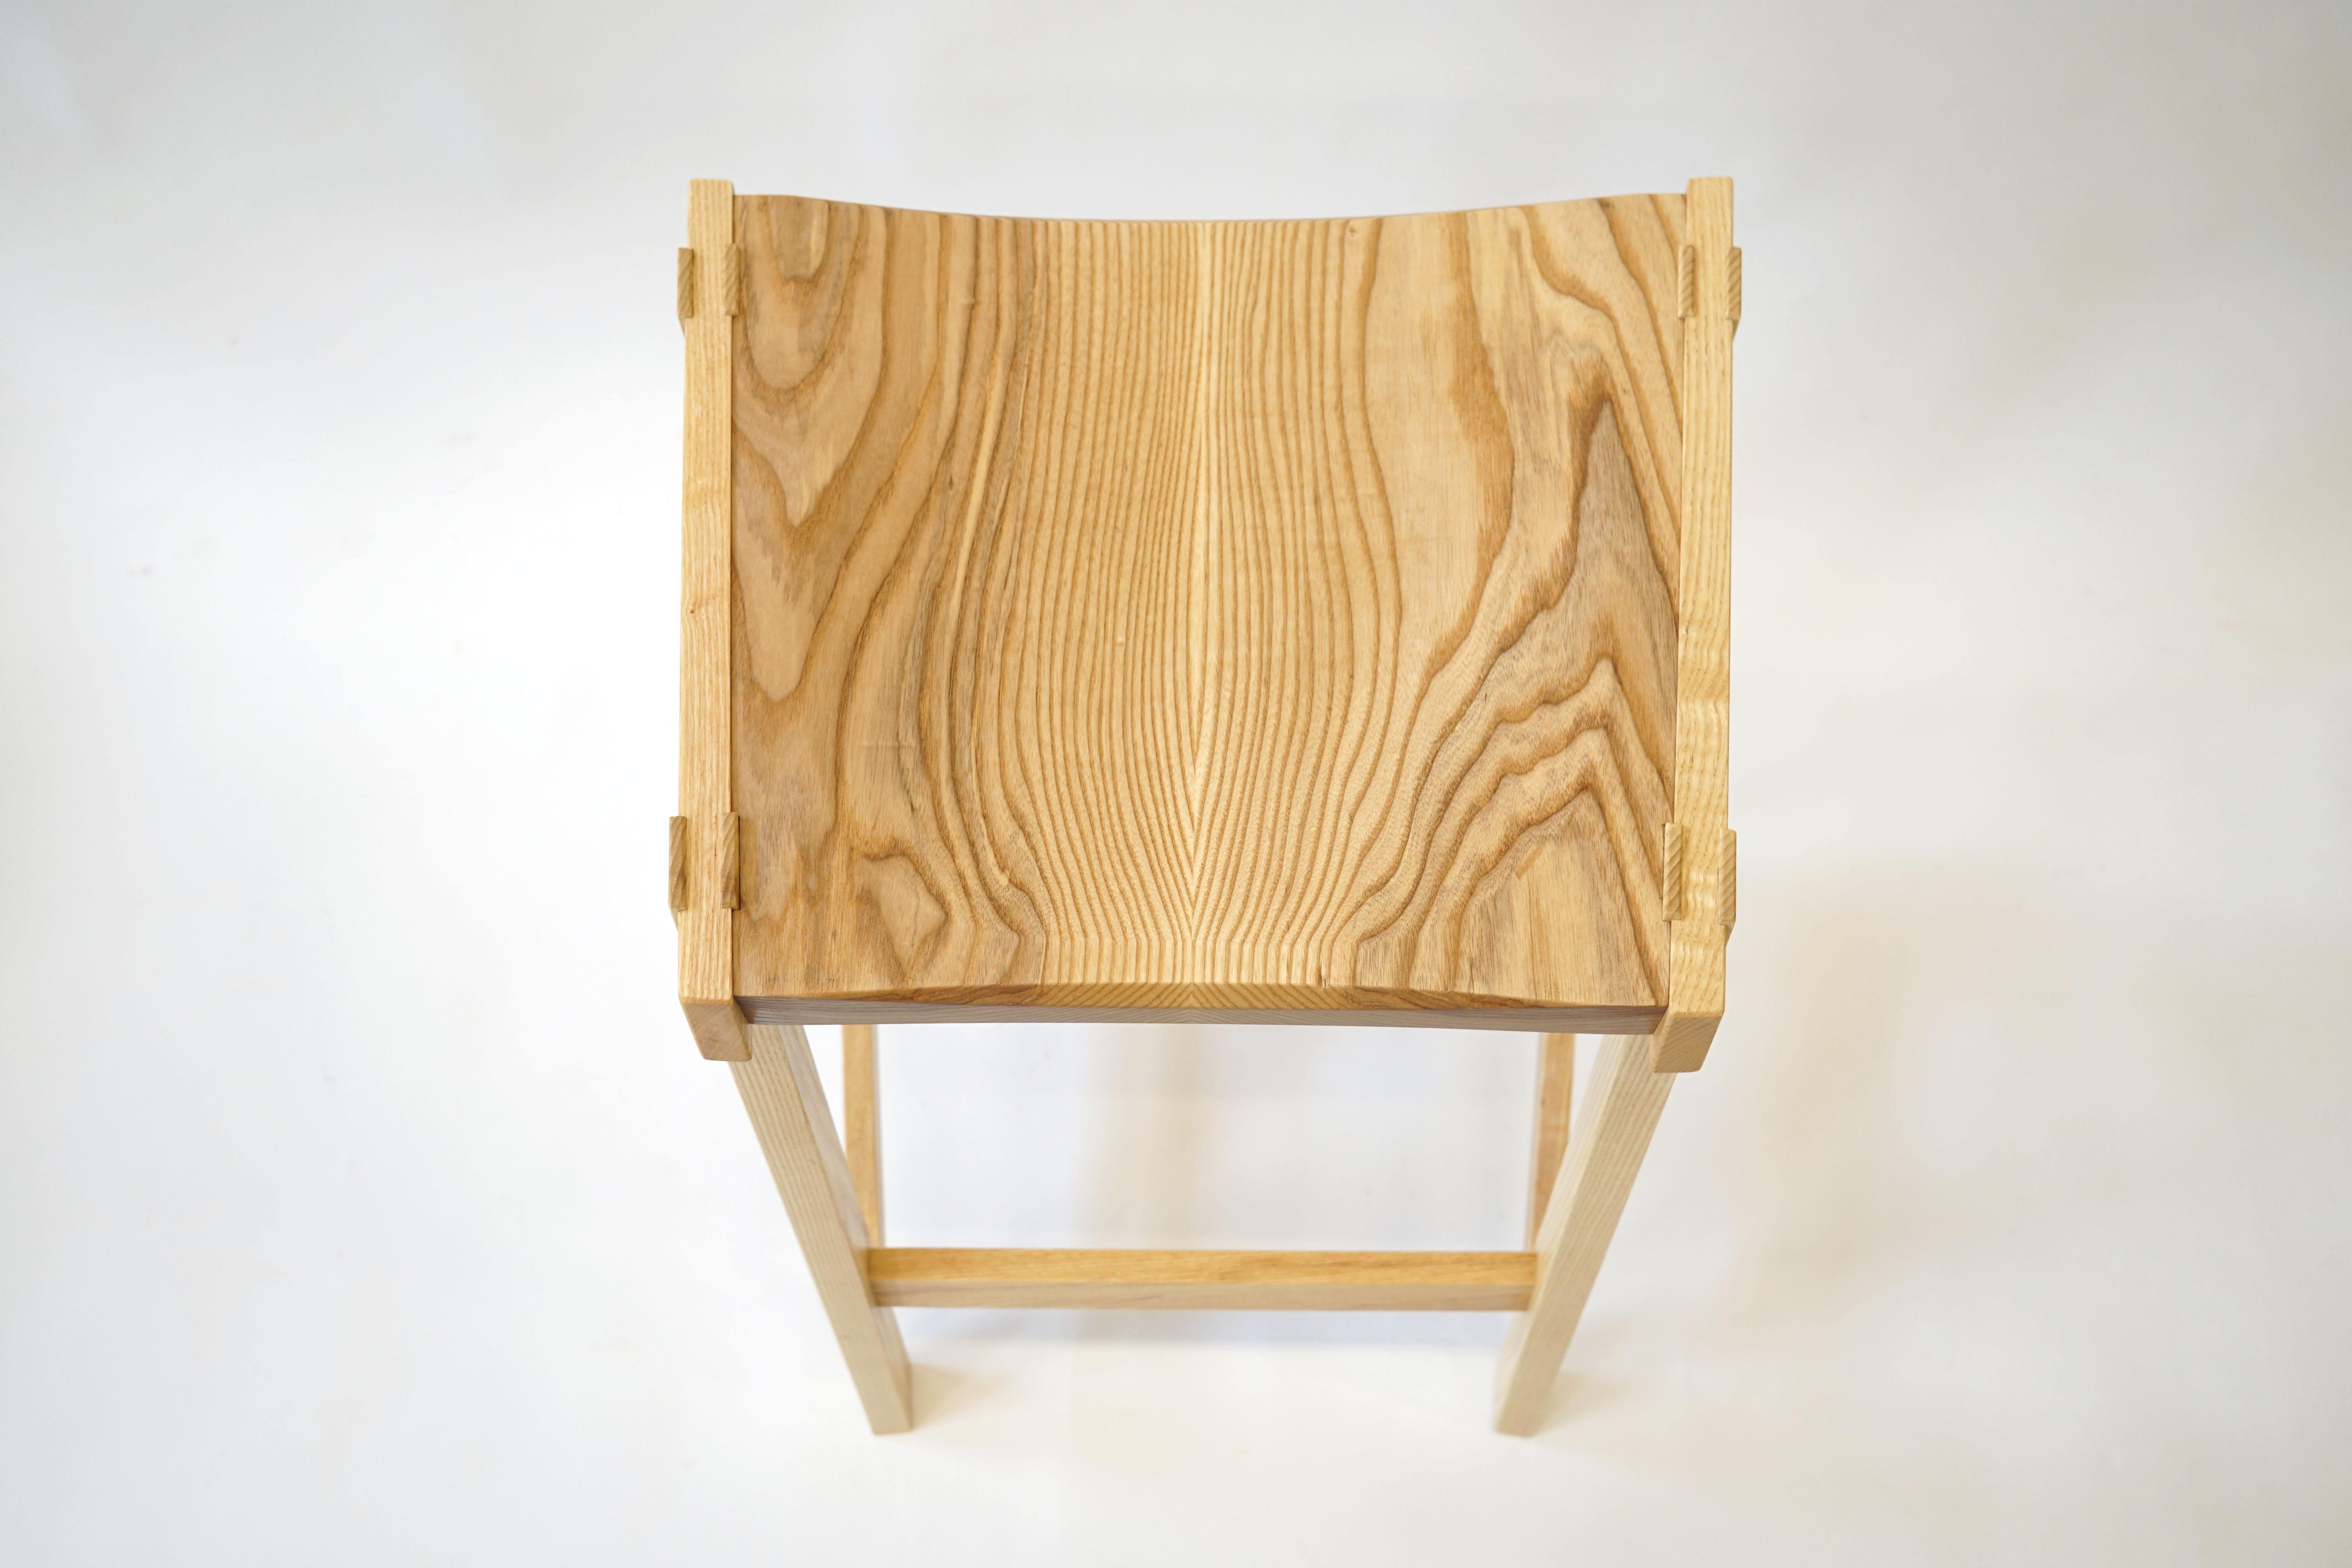 Montrose Stool in Ash, Exposed Joinery with a Hand Carved Seat For Sale 6